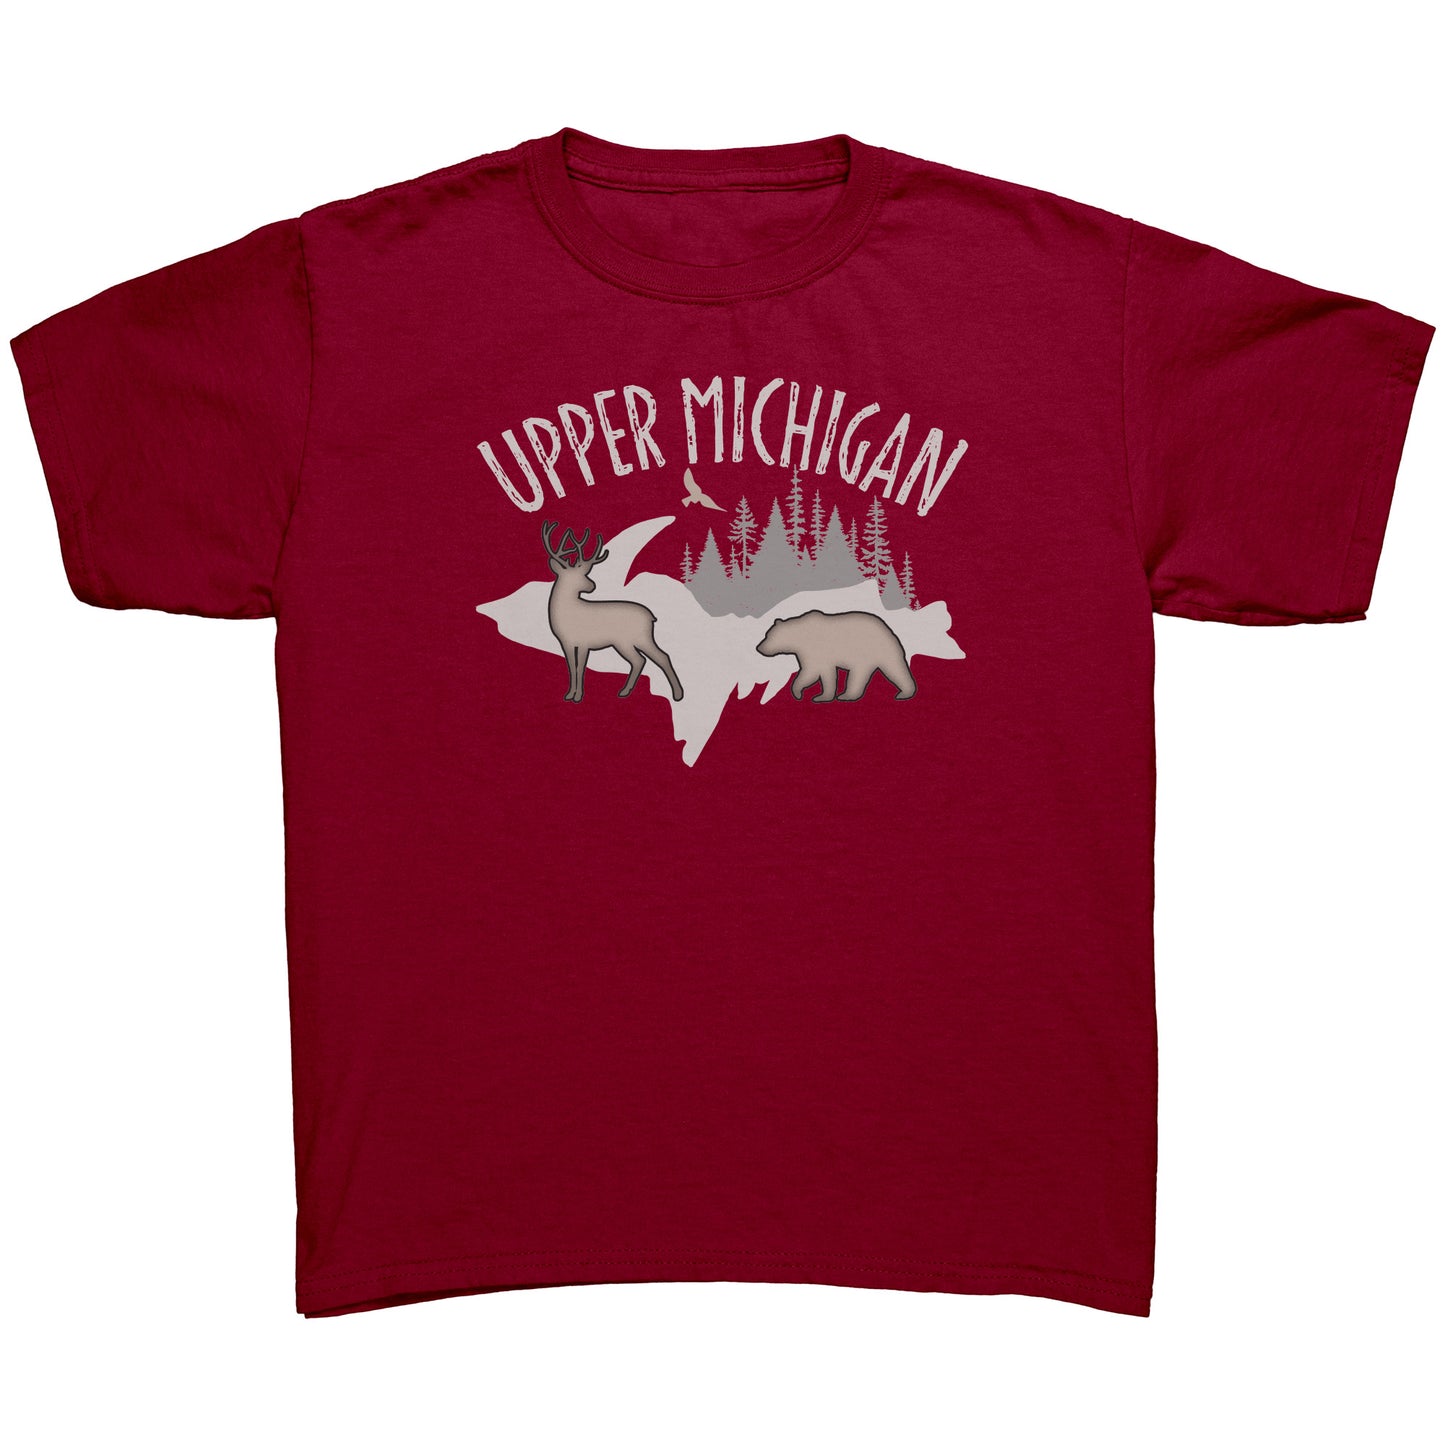 Upper Michigan Shirt with Deer, Bear, and Forest